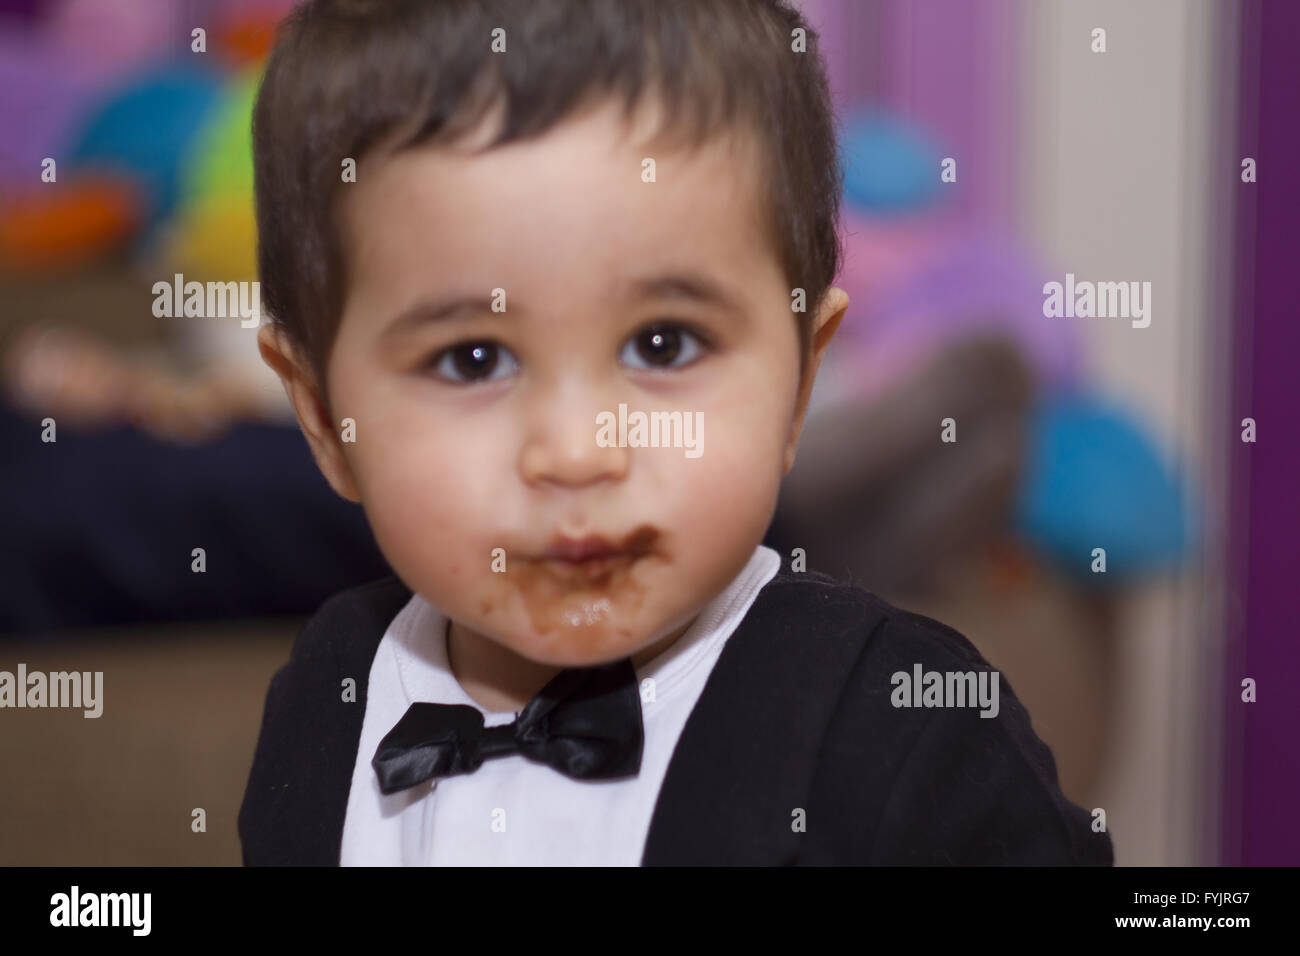 Adorable happy baby eating chocolate, wearing suit and bow tie Stock Photo